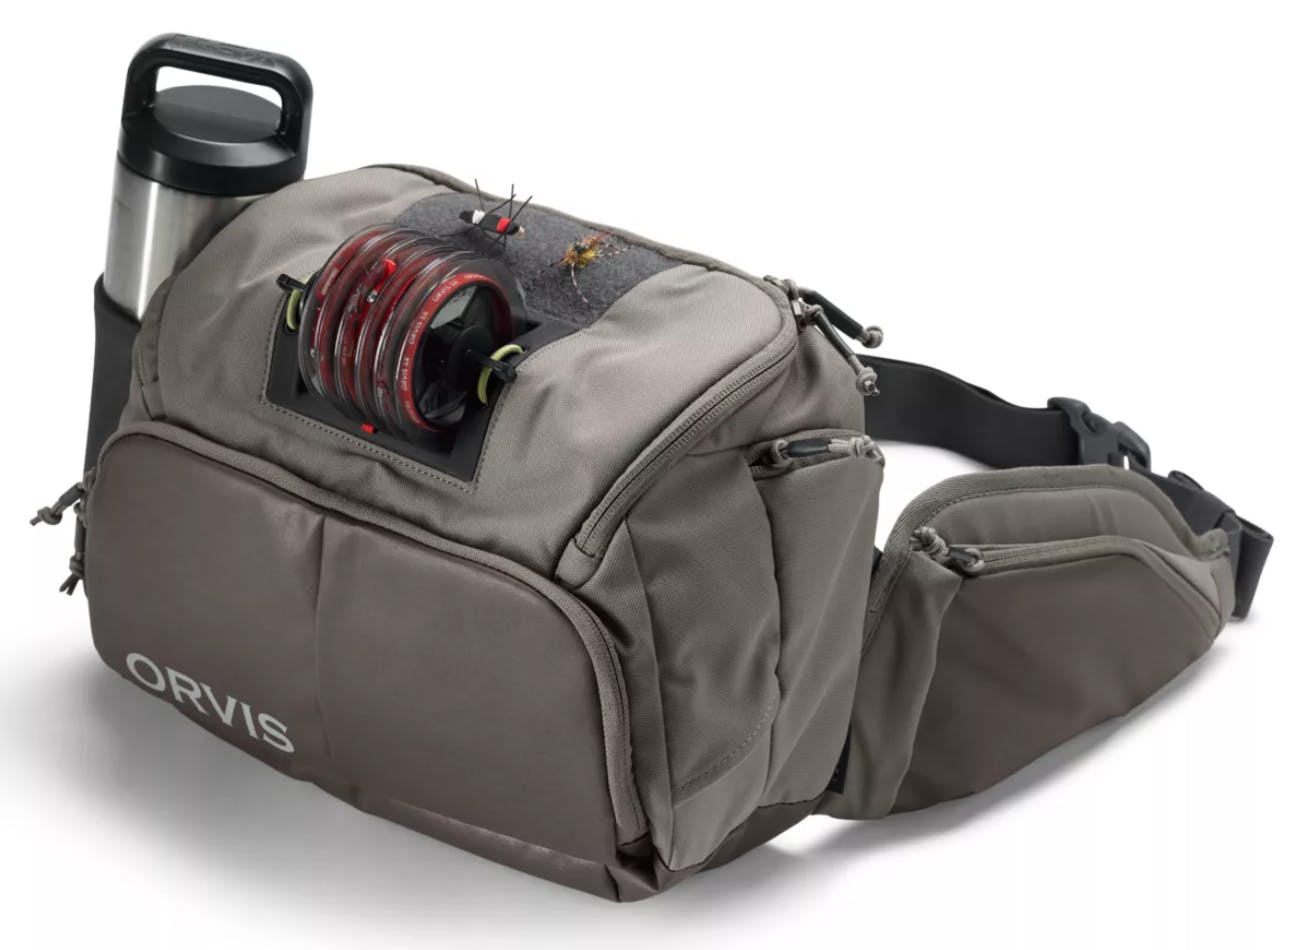 Product image of the Orvis Guide Hip Pack.